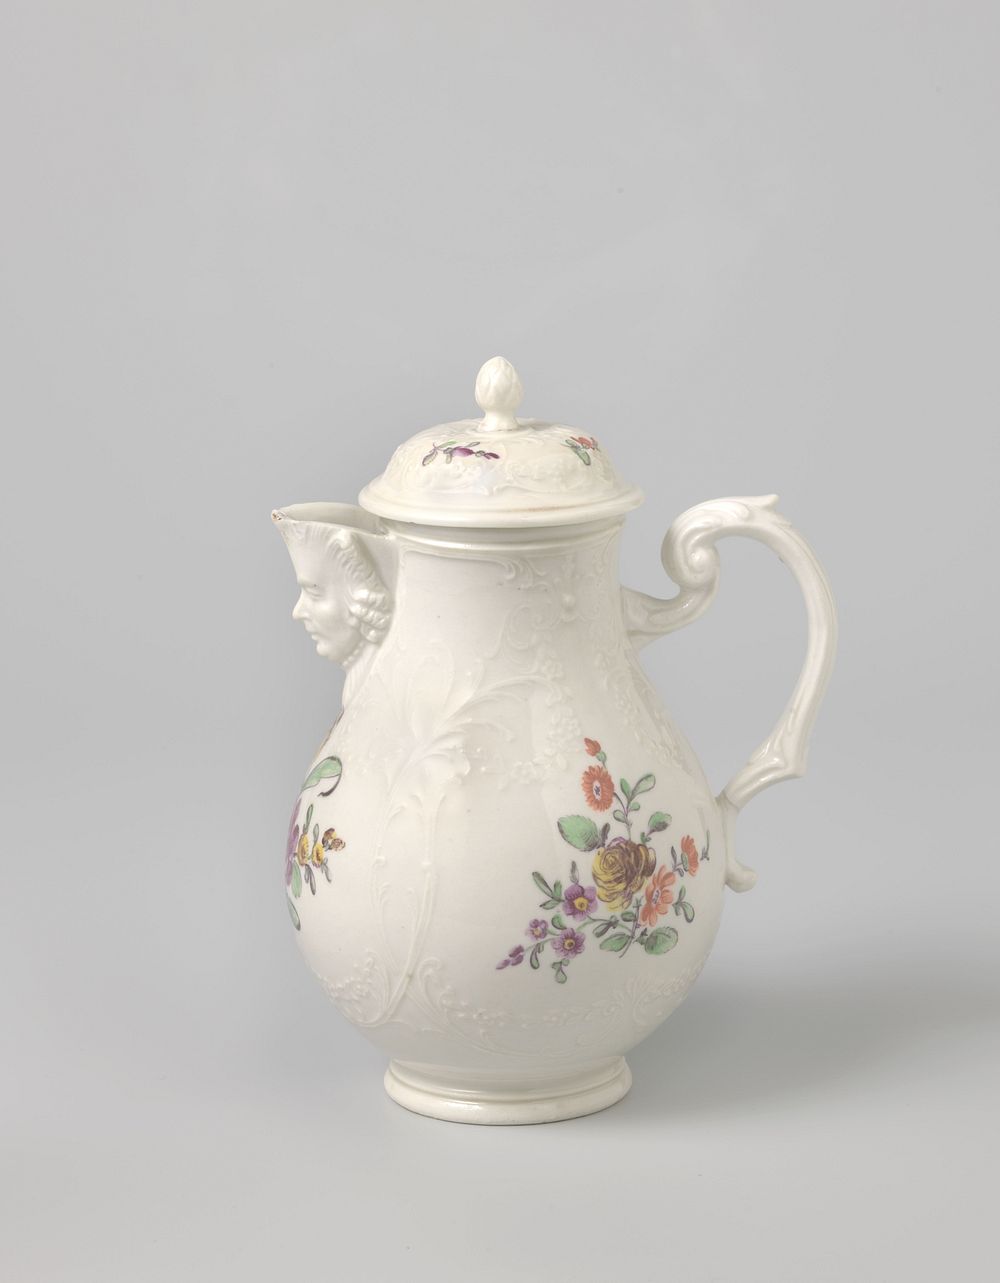 Cover of a ewer with flowers and floral scrolls (c. 1775 - c. 1780) by Würzburg